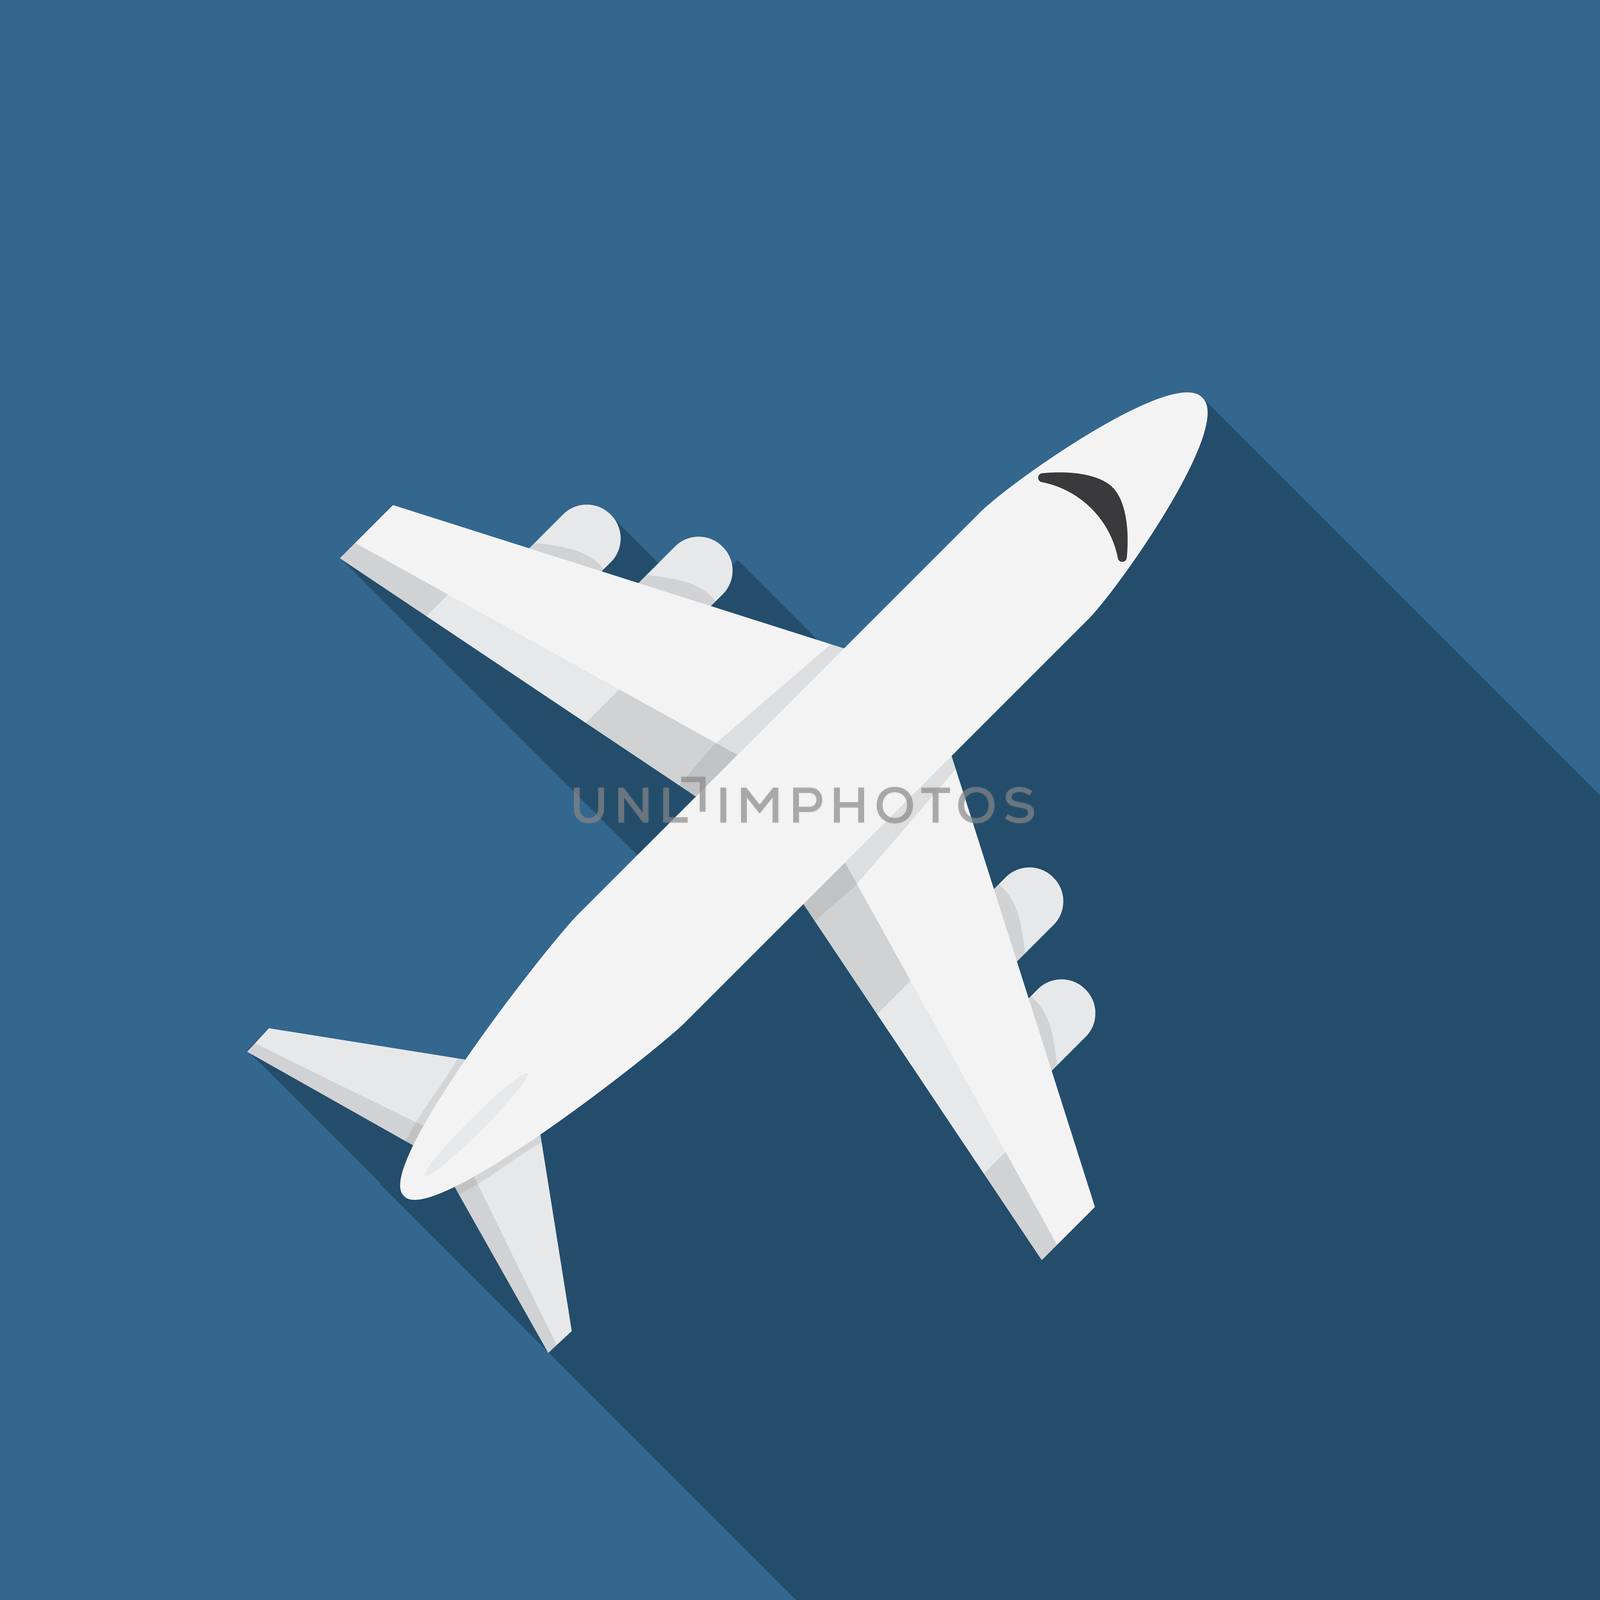 Flat design modern vector illustration of airplane icon with long shadow.